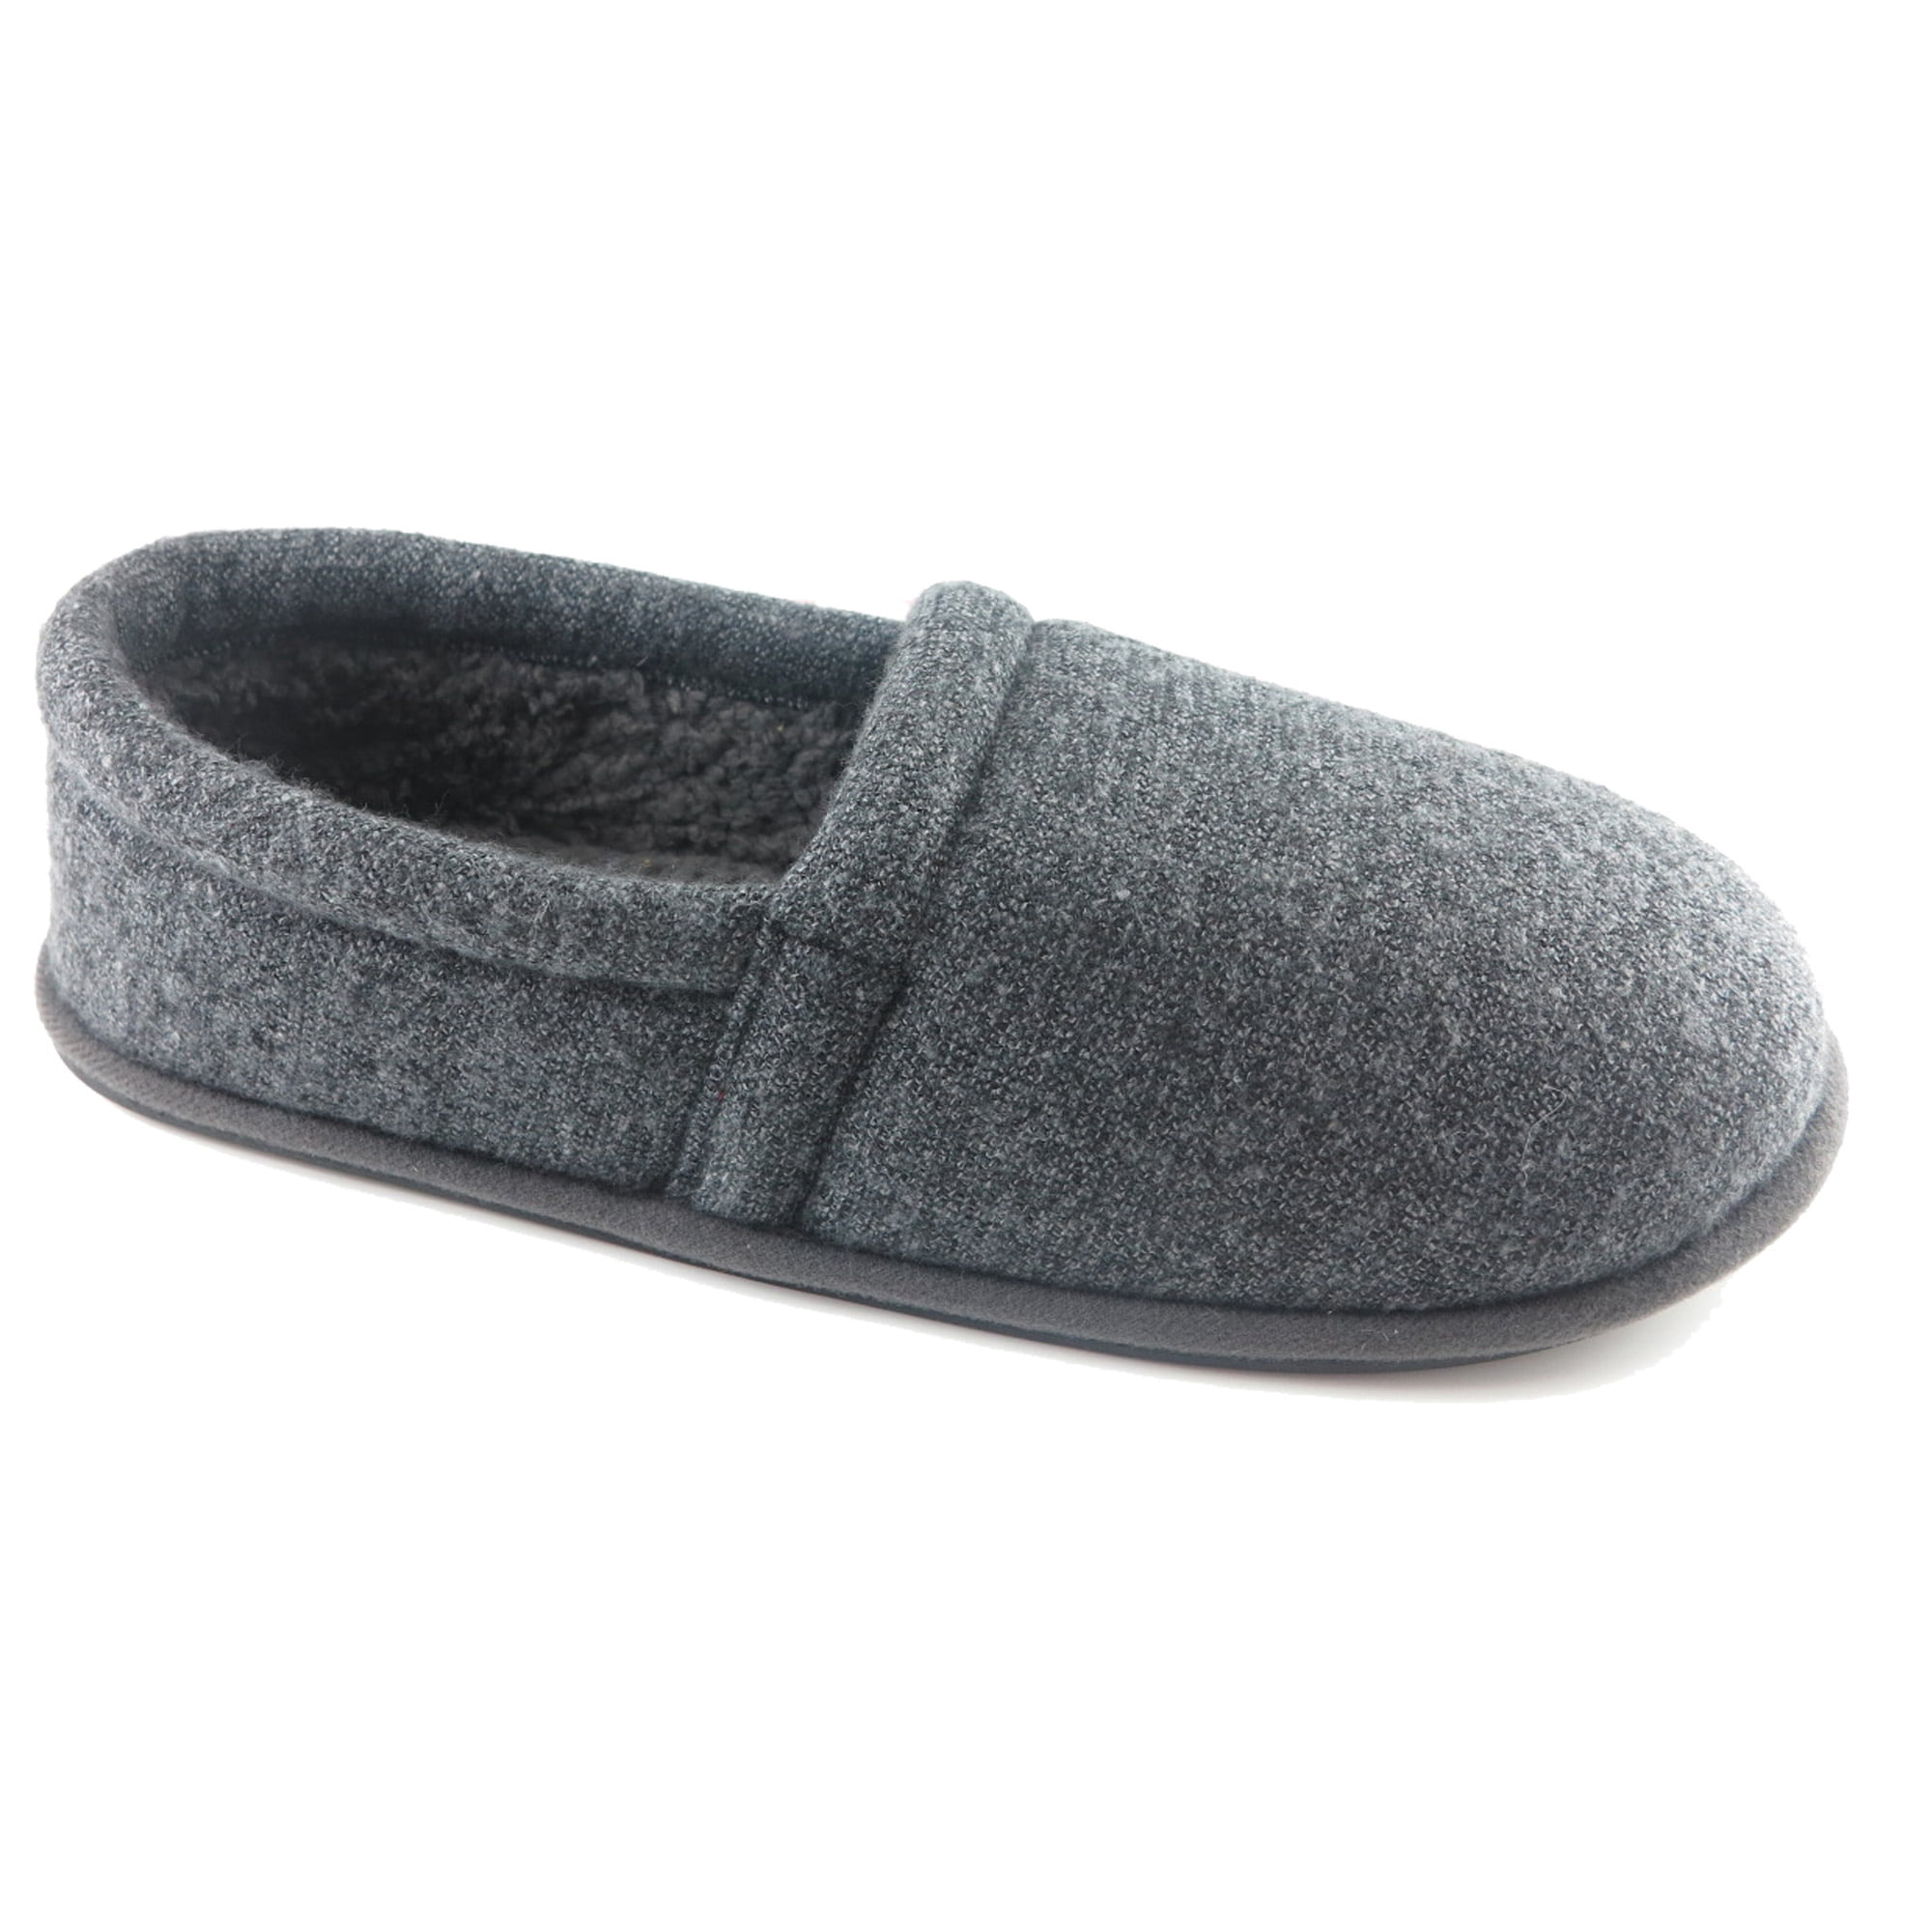 sweater slippers